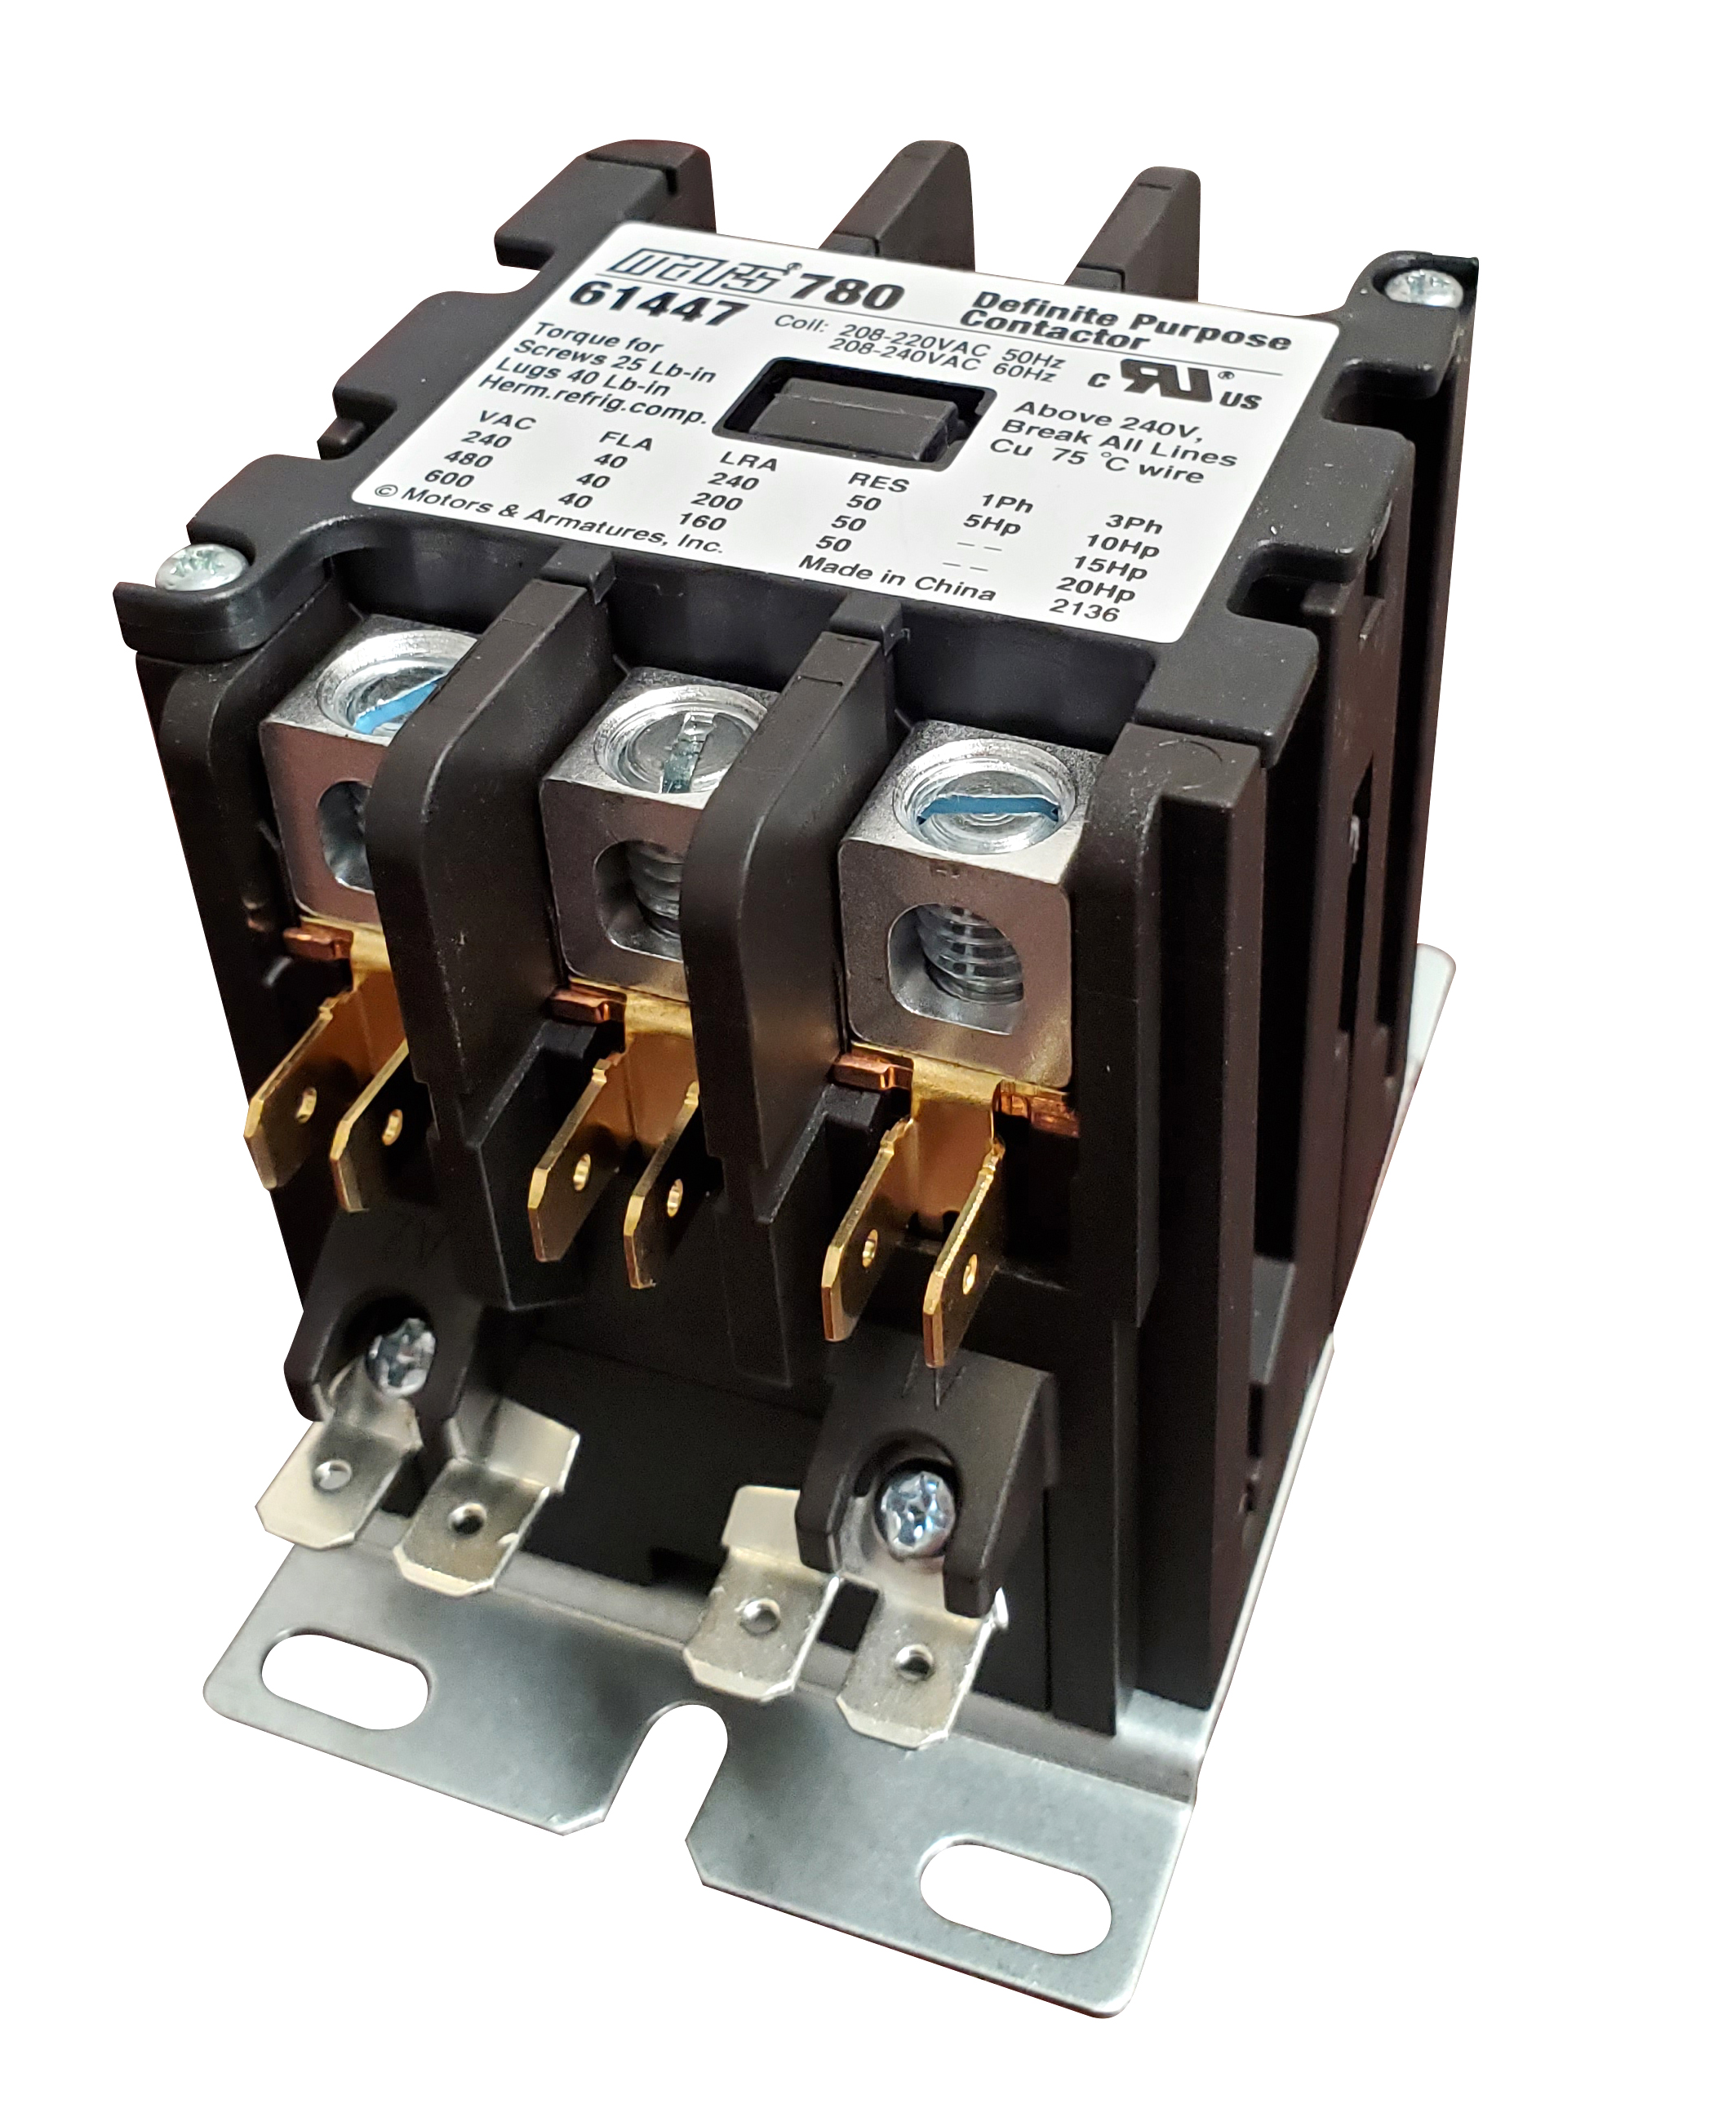 Mars Replacement Titan Max Dp Contactor 3 Pole 40 Amp  61447 By Titan 